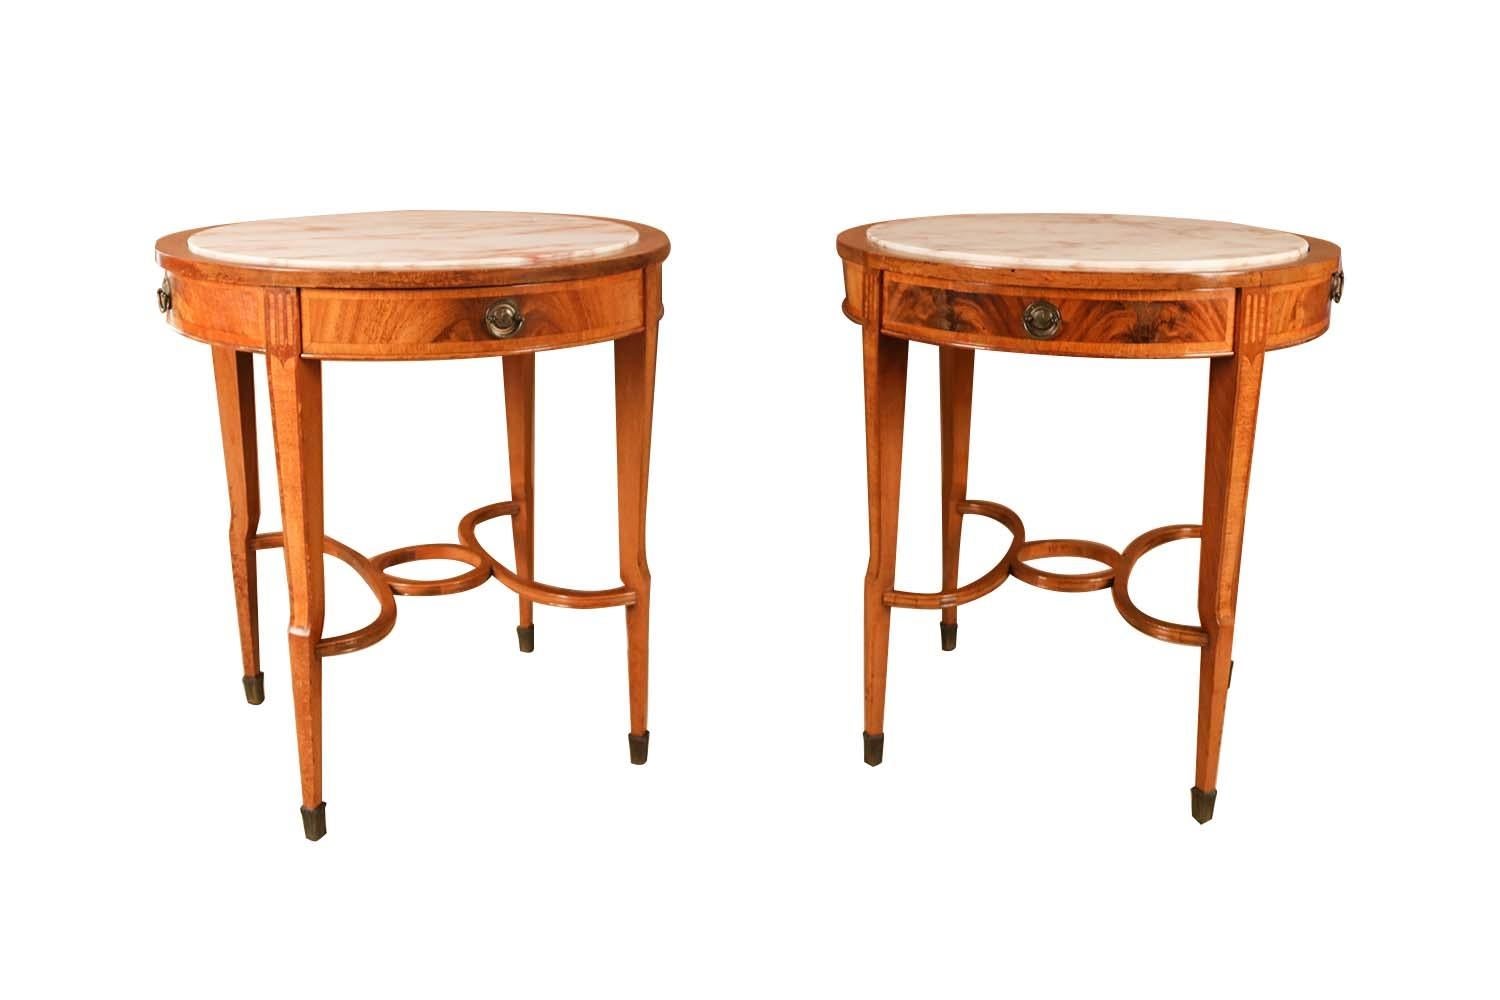 A pair of 19th century French Louis XVI marble top accent tables. These spectacular tables are composed of a mixed wood frame with a beautiful grey, white, and dark rose inset marble top and a center drawer. This pair of exquisite tables feature a